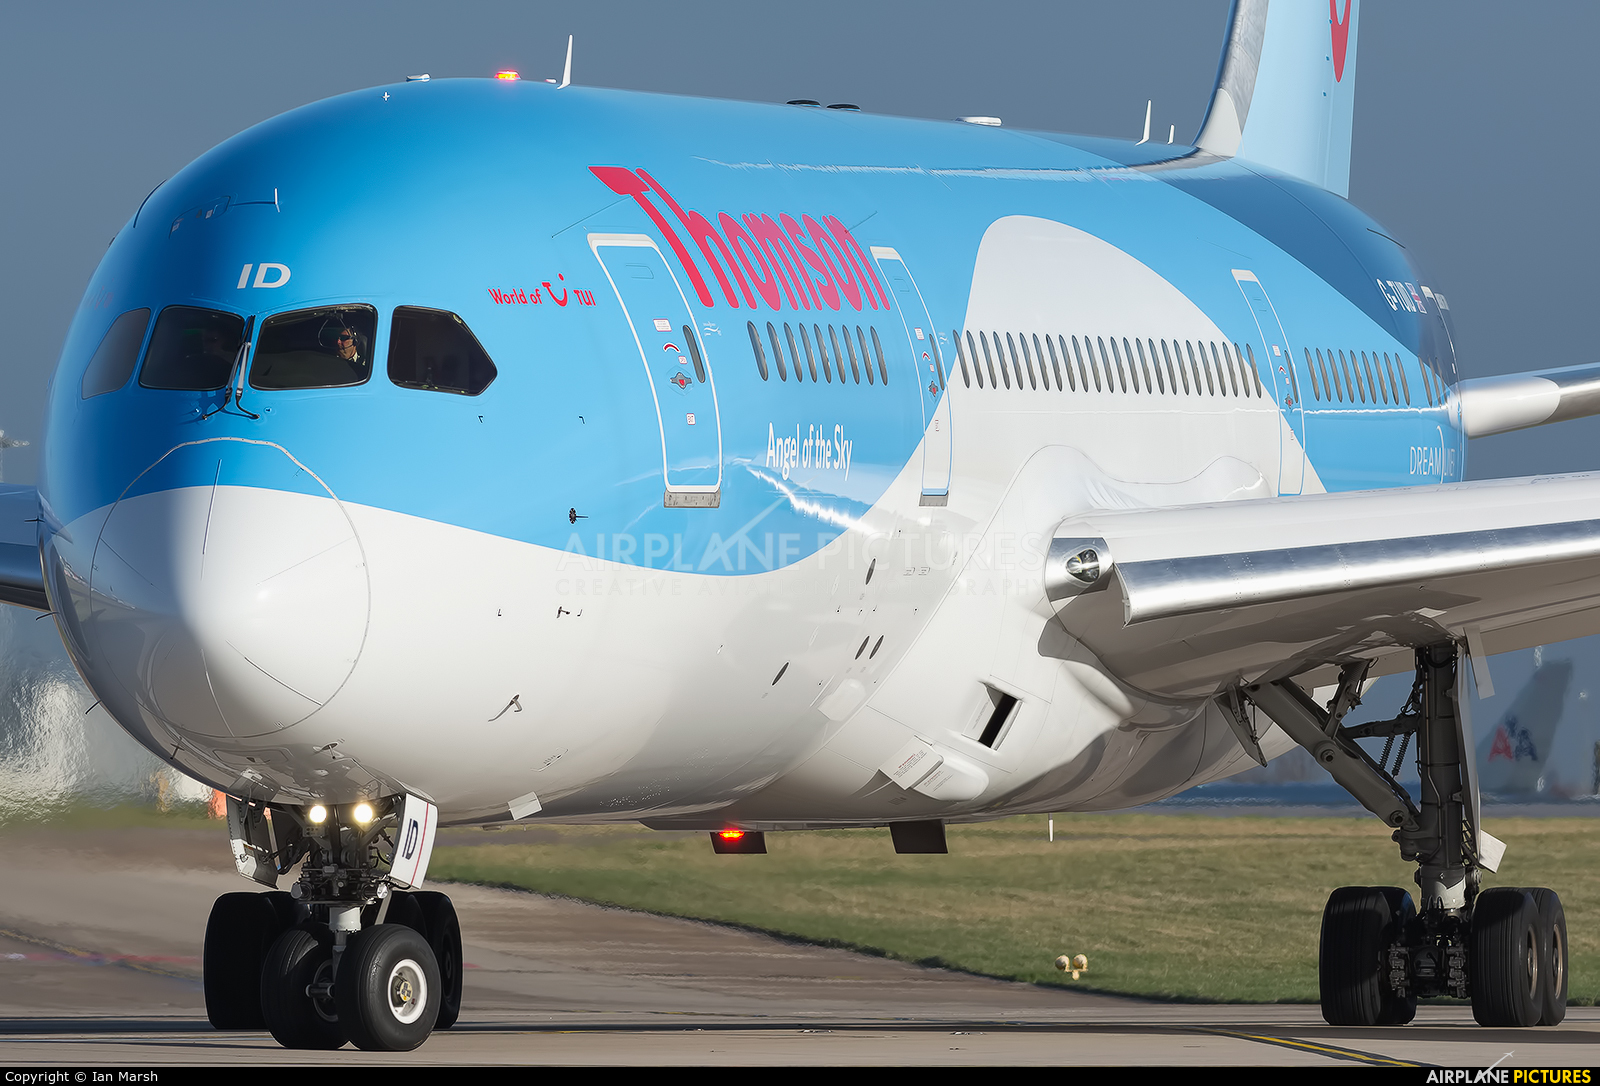 Thomson/Thomsonfly G-TUID aircraft at Manchester